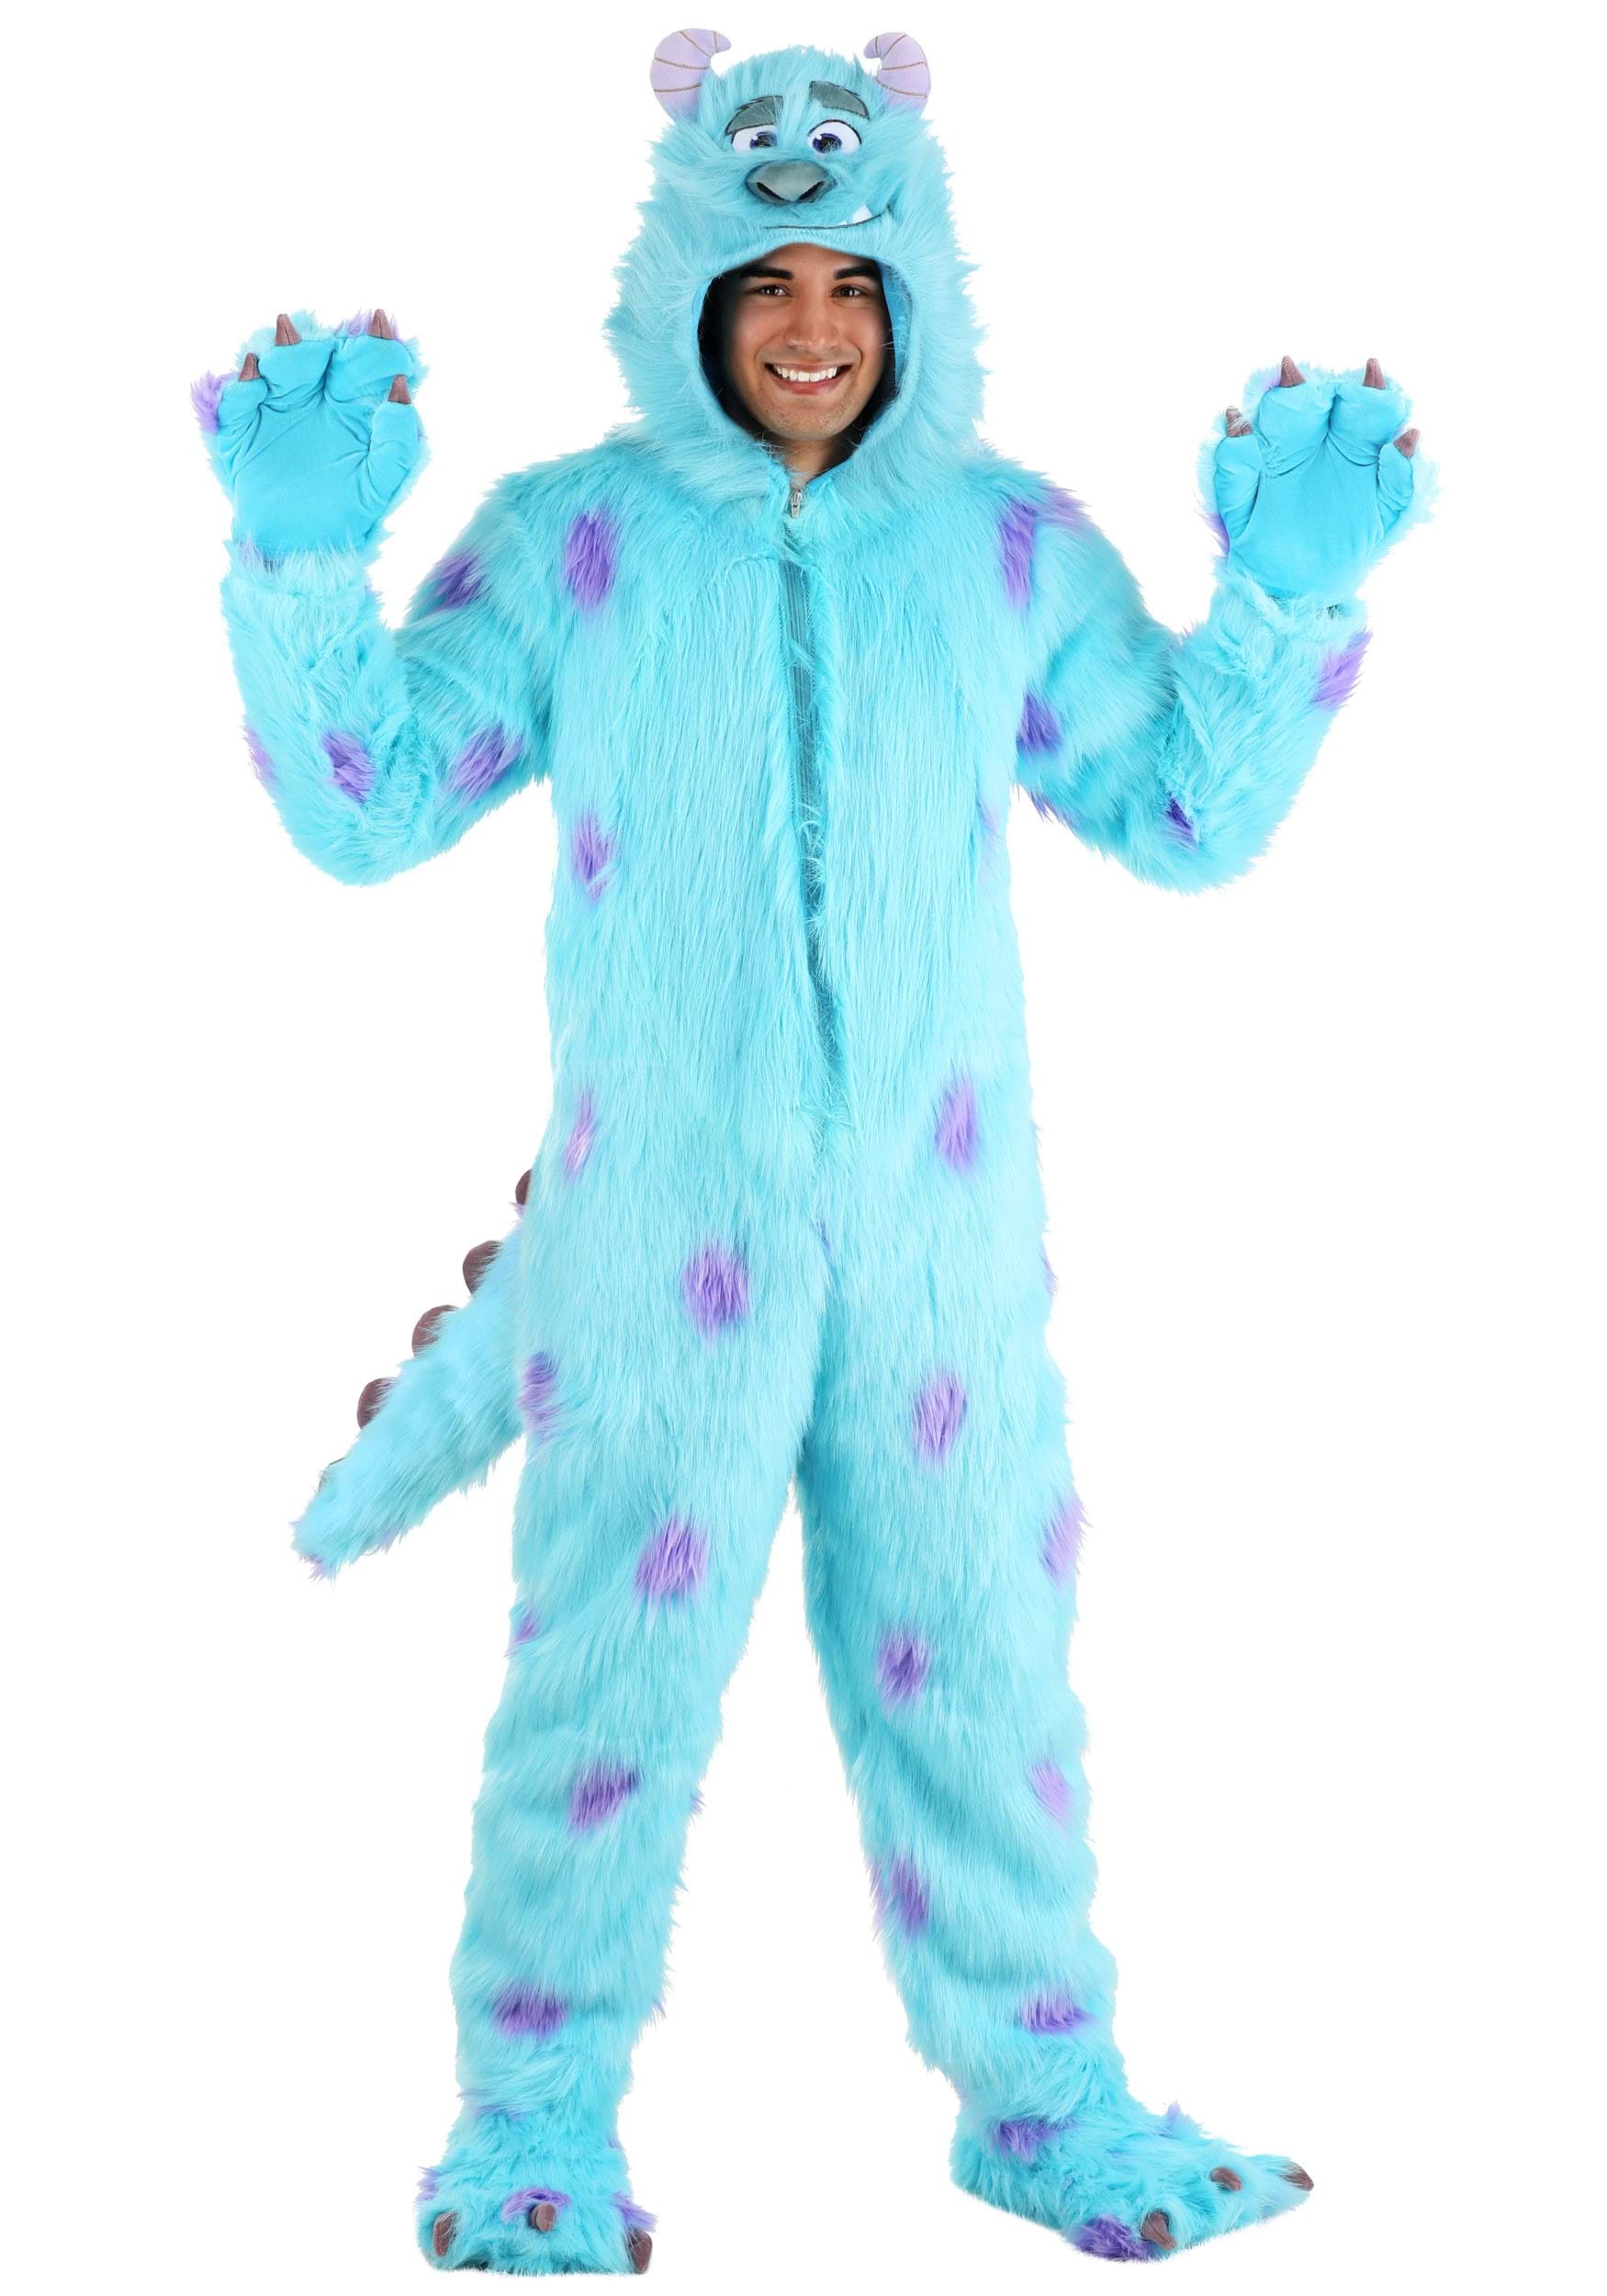 Photos - Fancy Dress Disney FUN Costumes  Monsters Inc Hooded Sulley Adult Costume |  Cost 